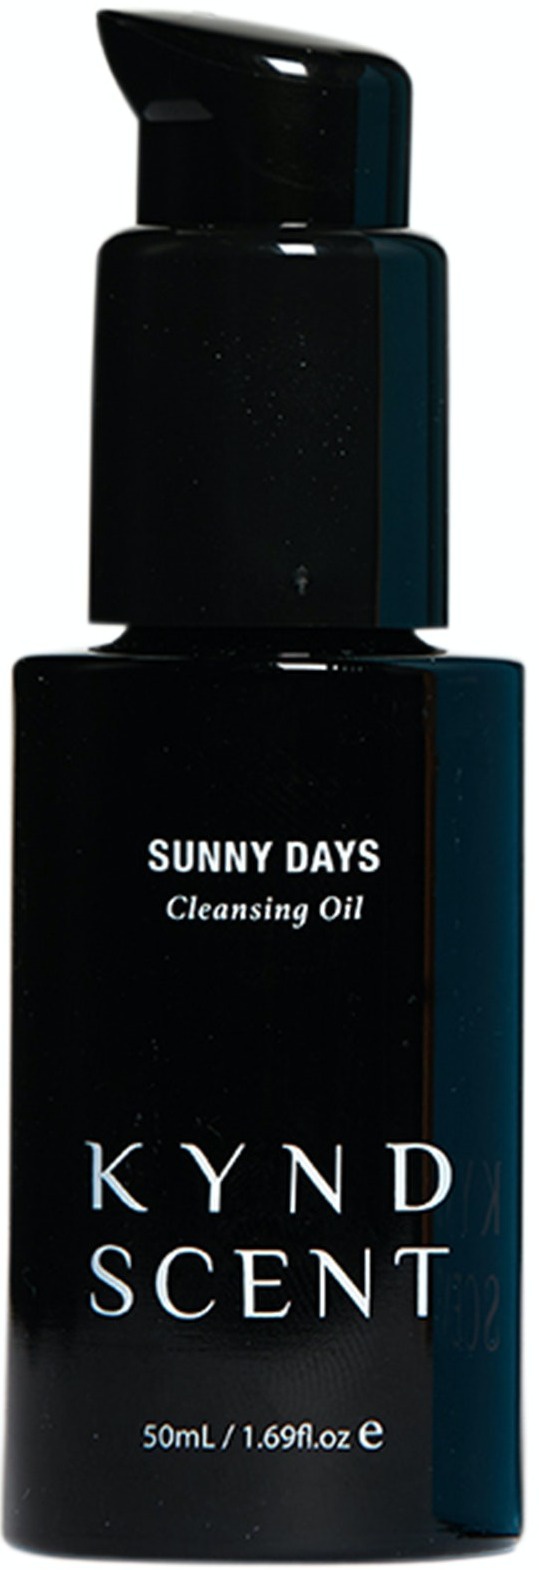 Kynd Scent Sunny Days Cleansing Oil